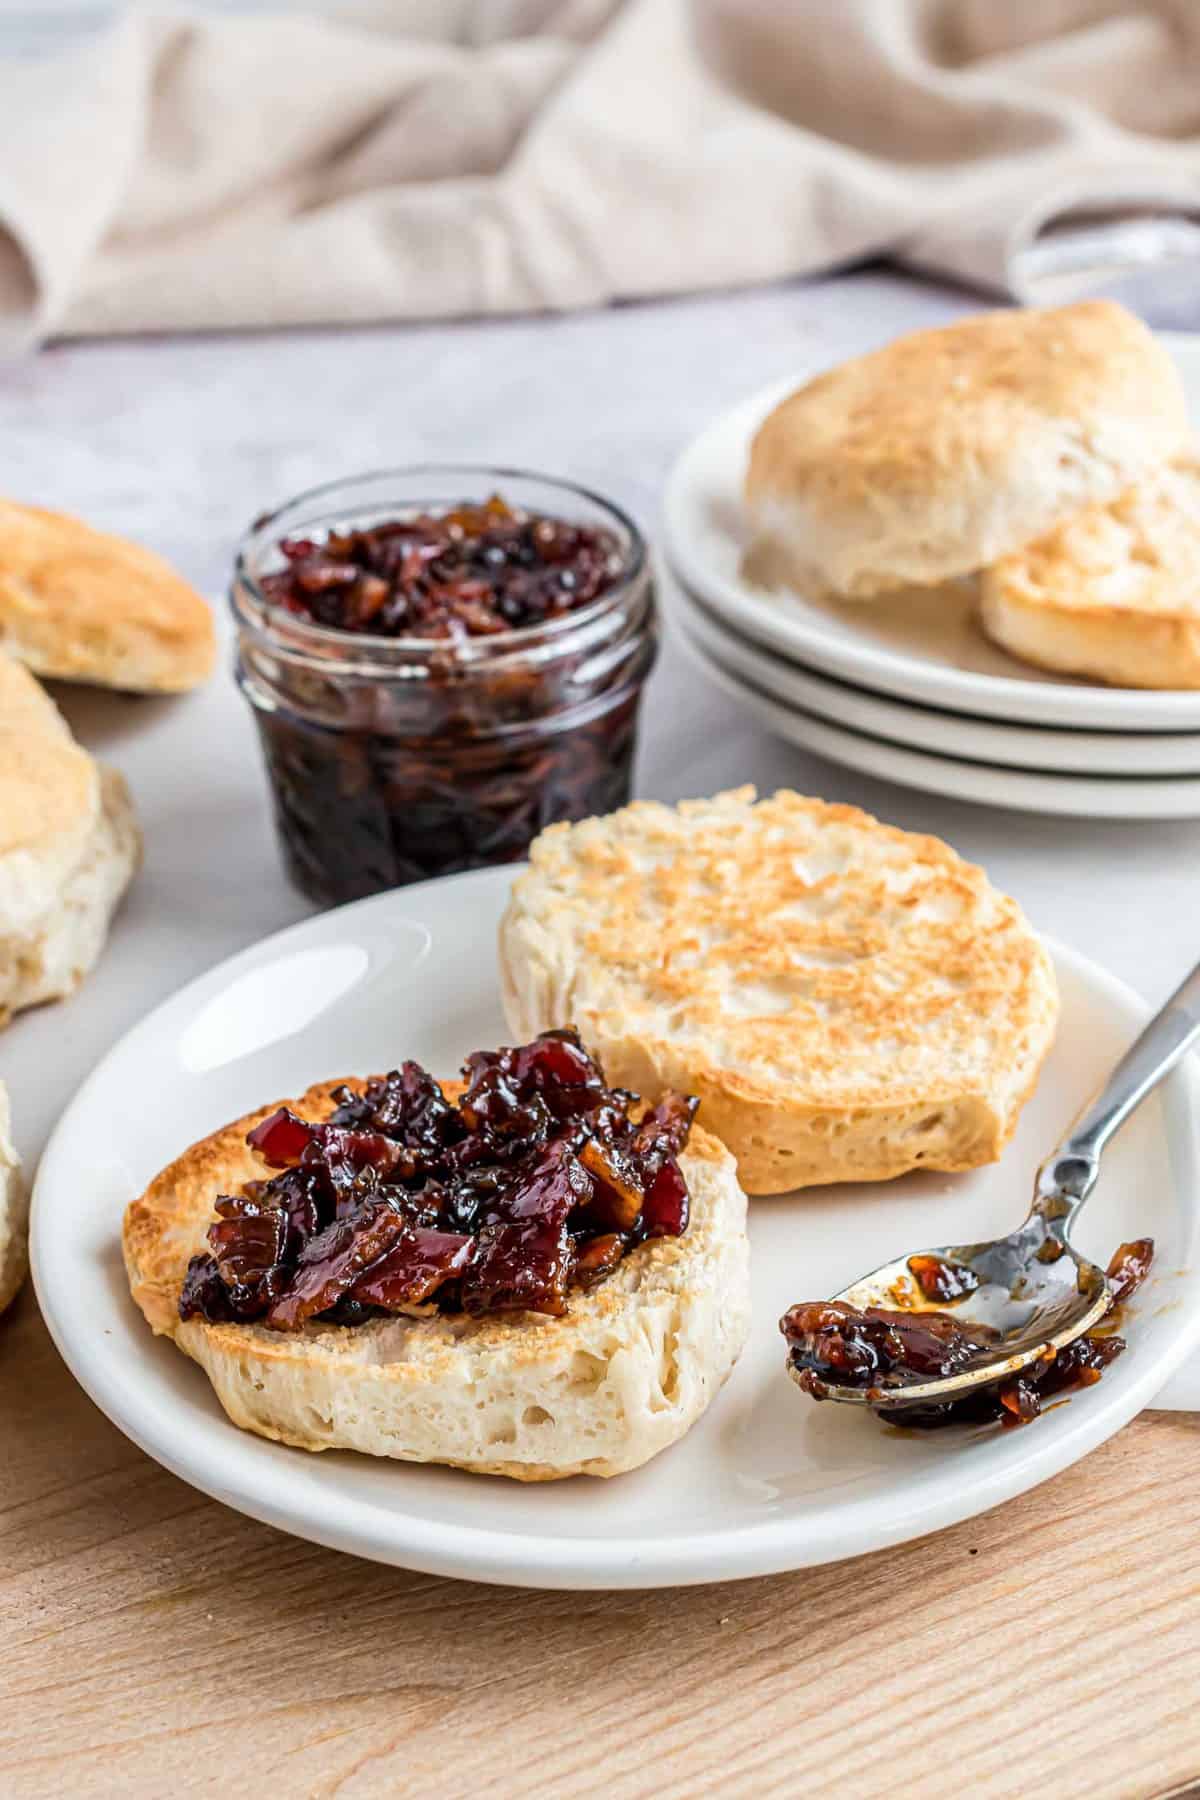 Jam made with bacon and bourbon, on a split open biscuit.